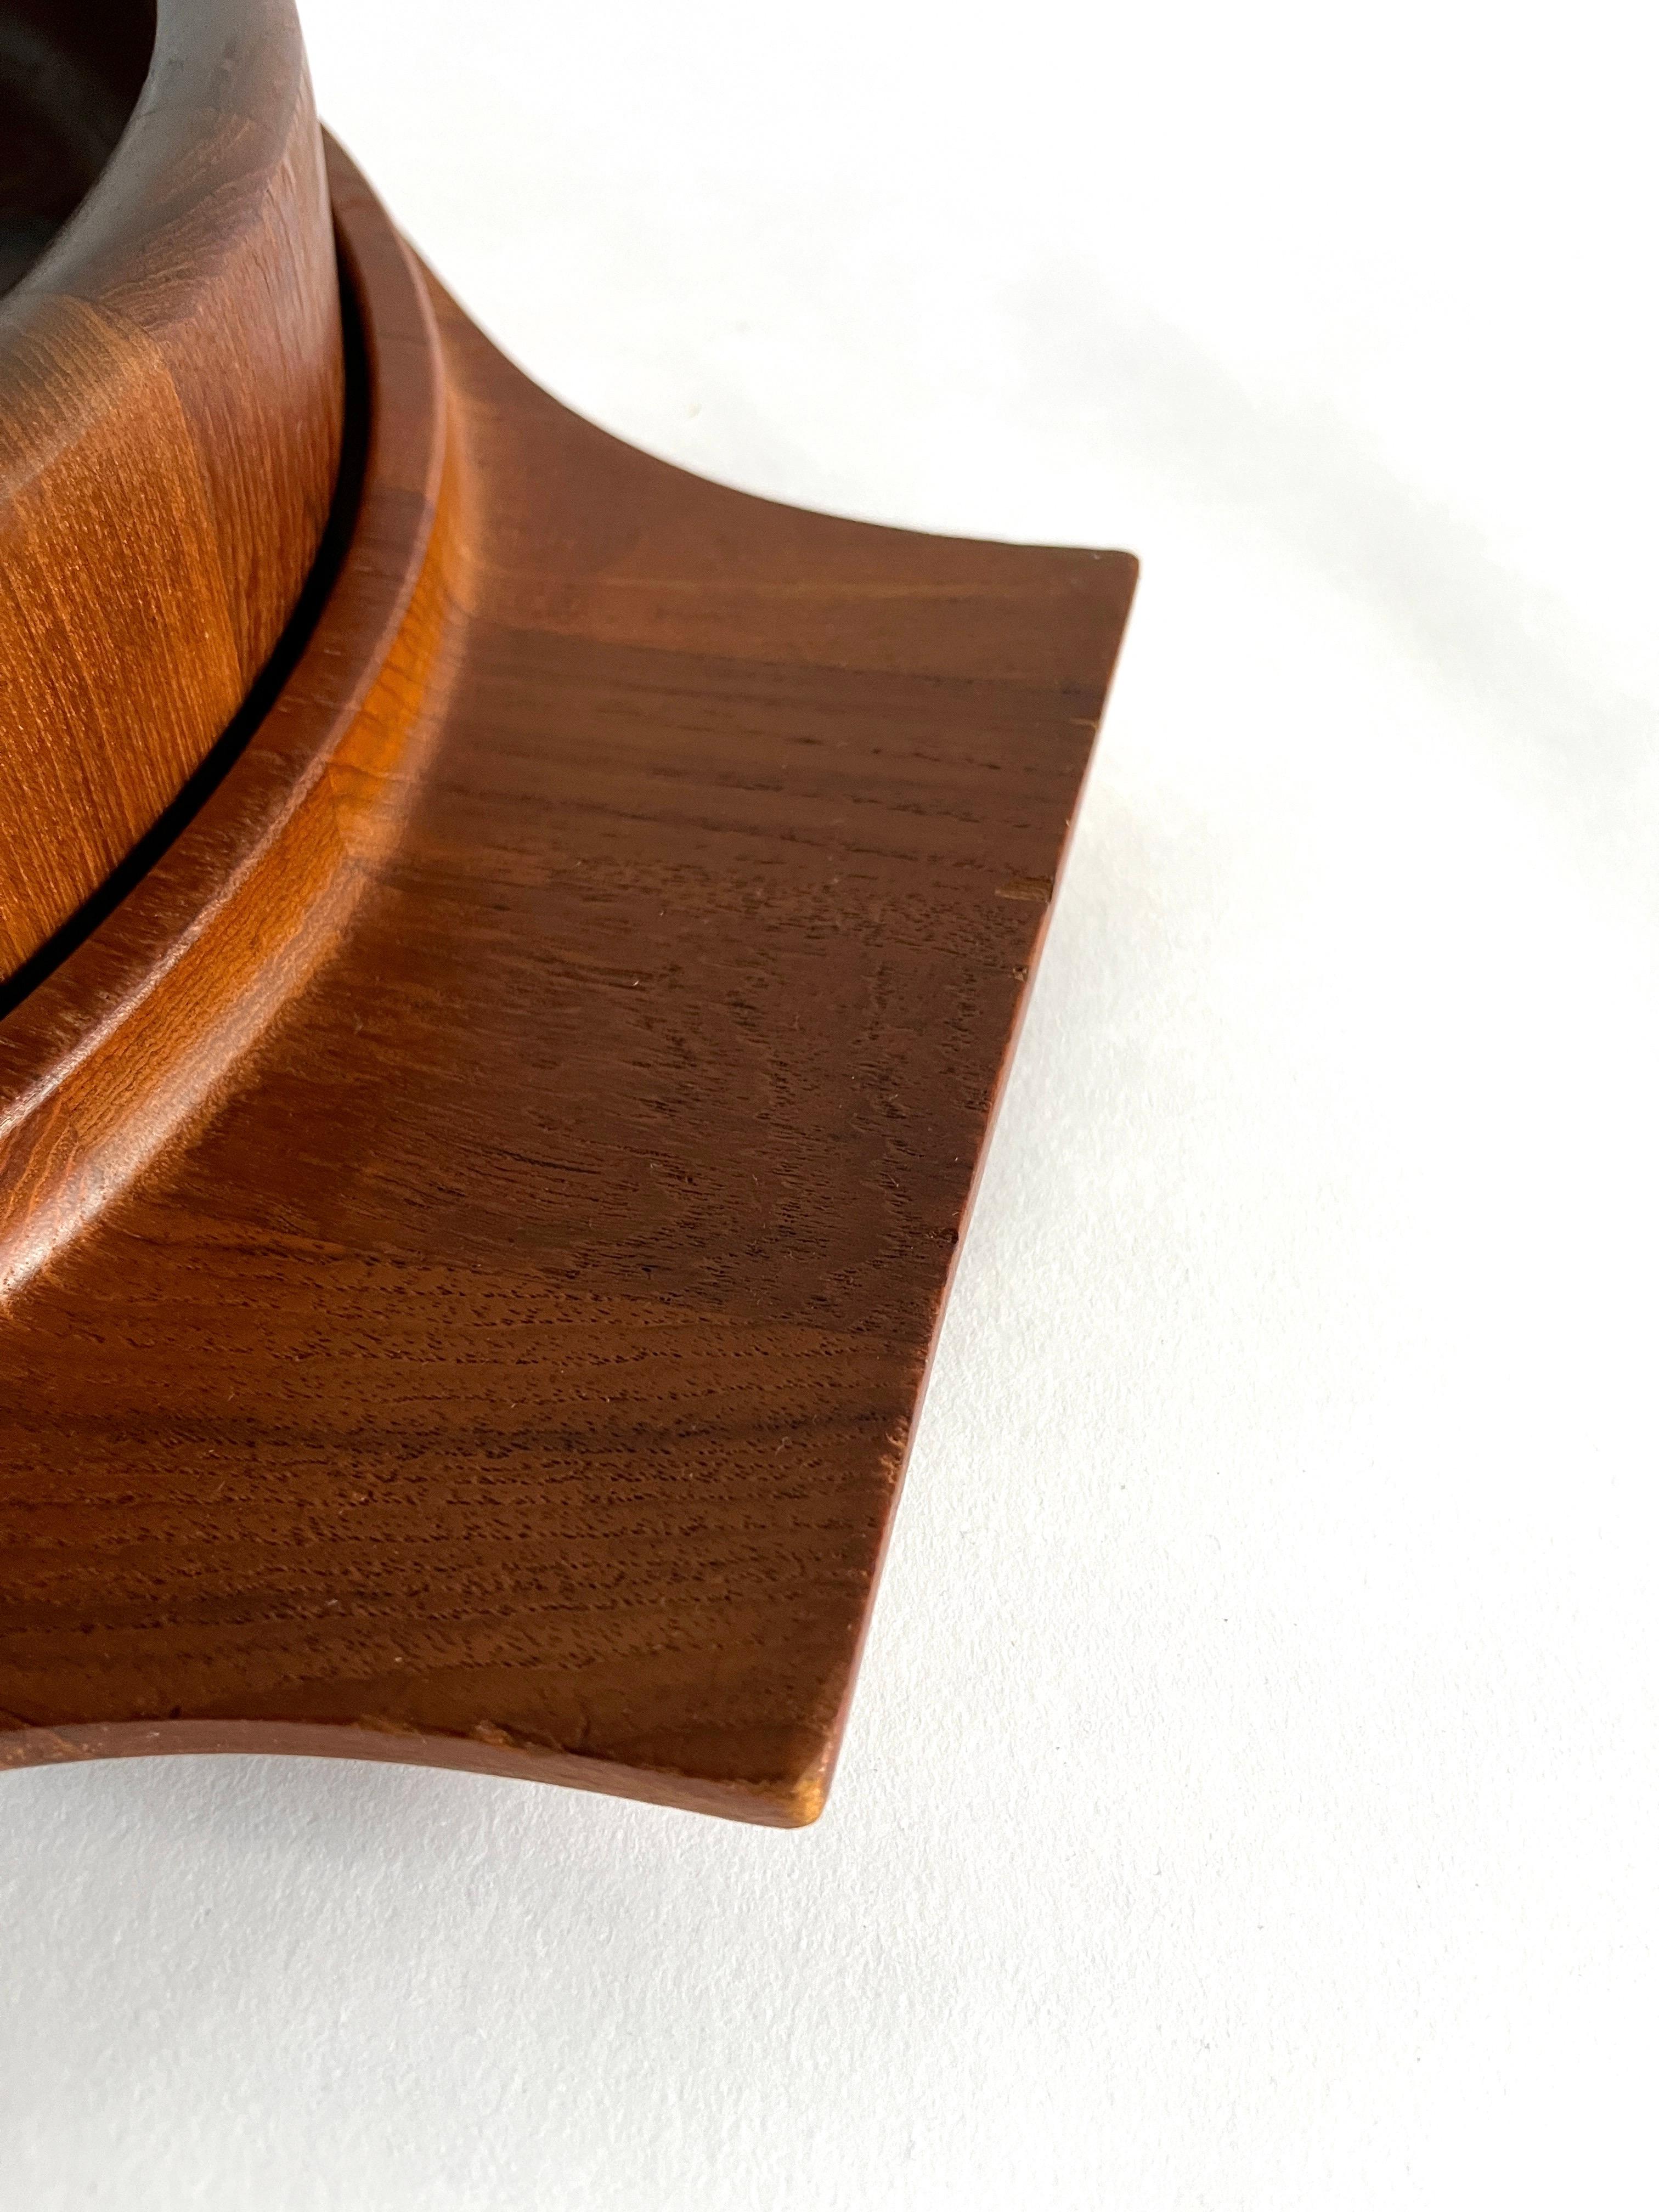 Mid-20th Century Danish Modern Teak Handled Serving Tray and Bowl by Jens Quistgaard for Dansk For Sale